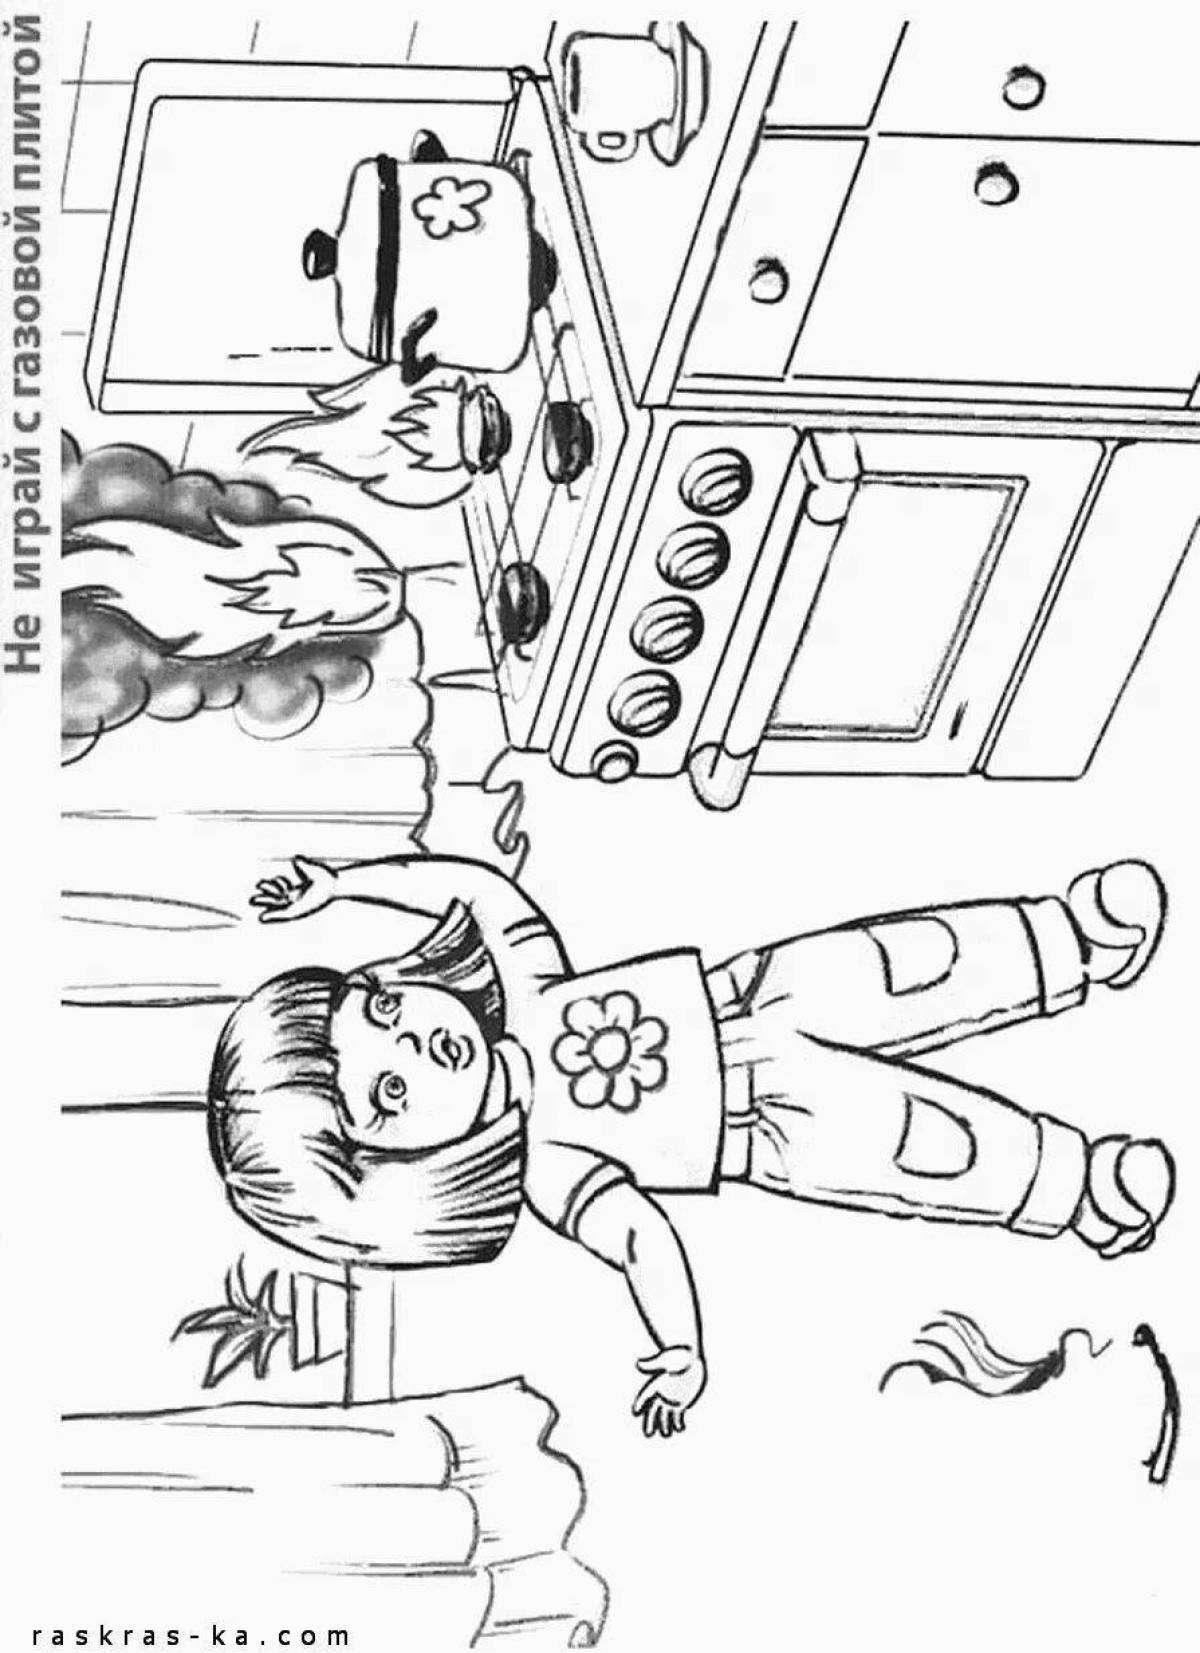 Colour-luminous home security coloring page